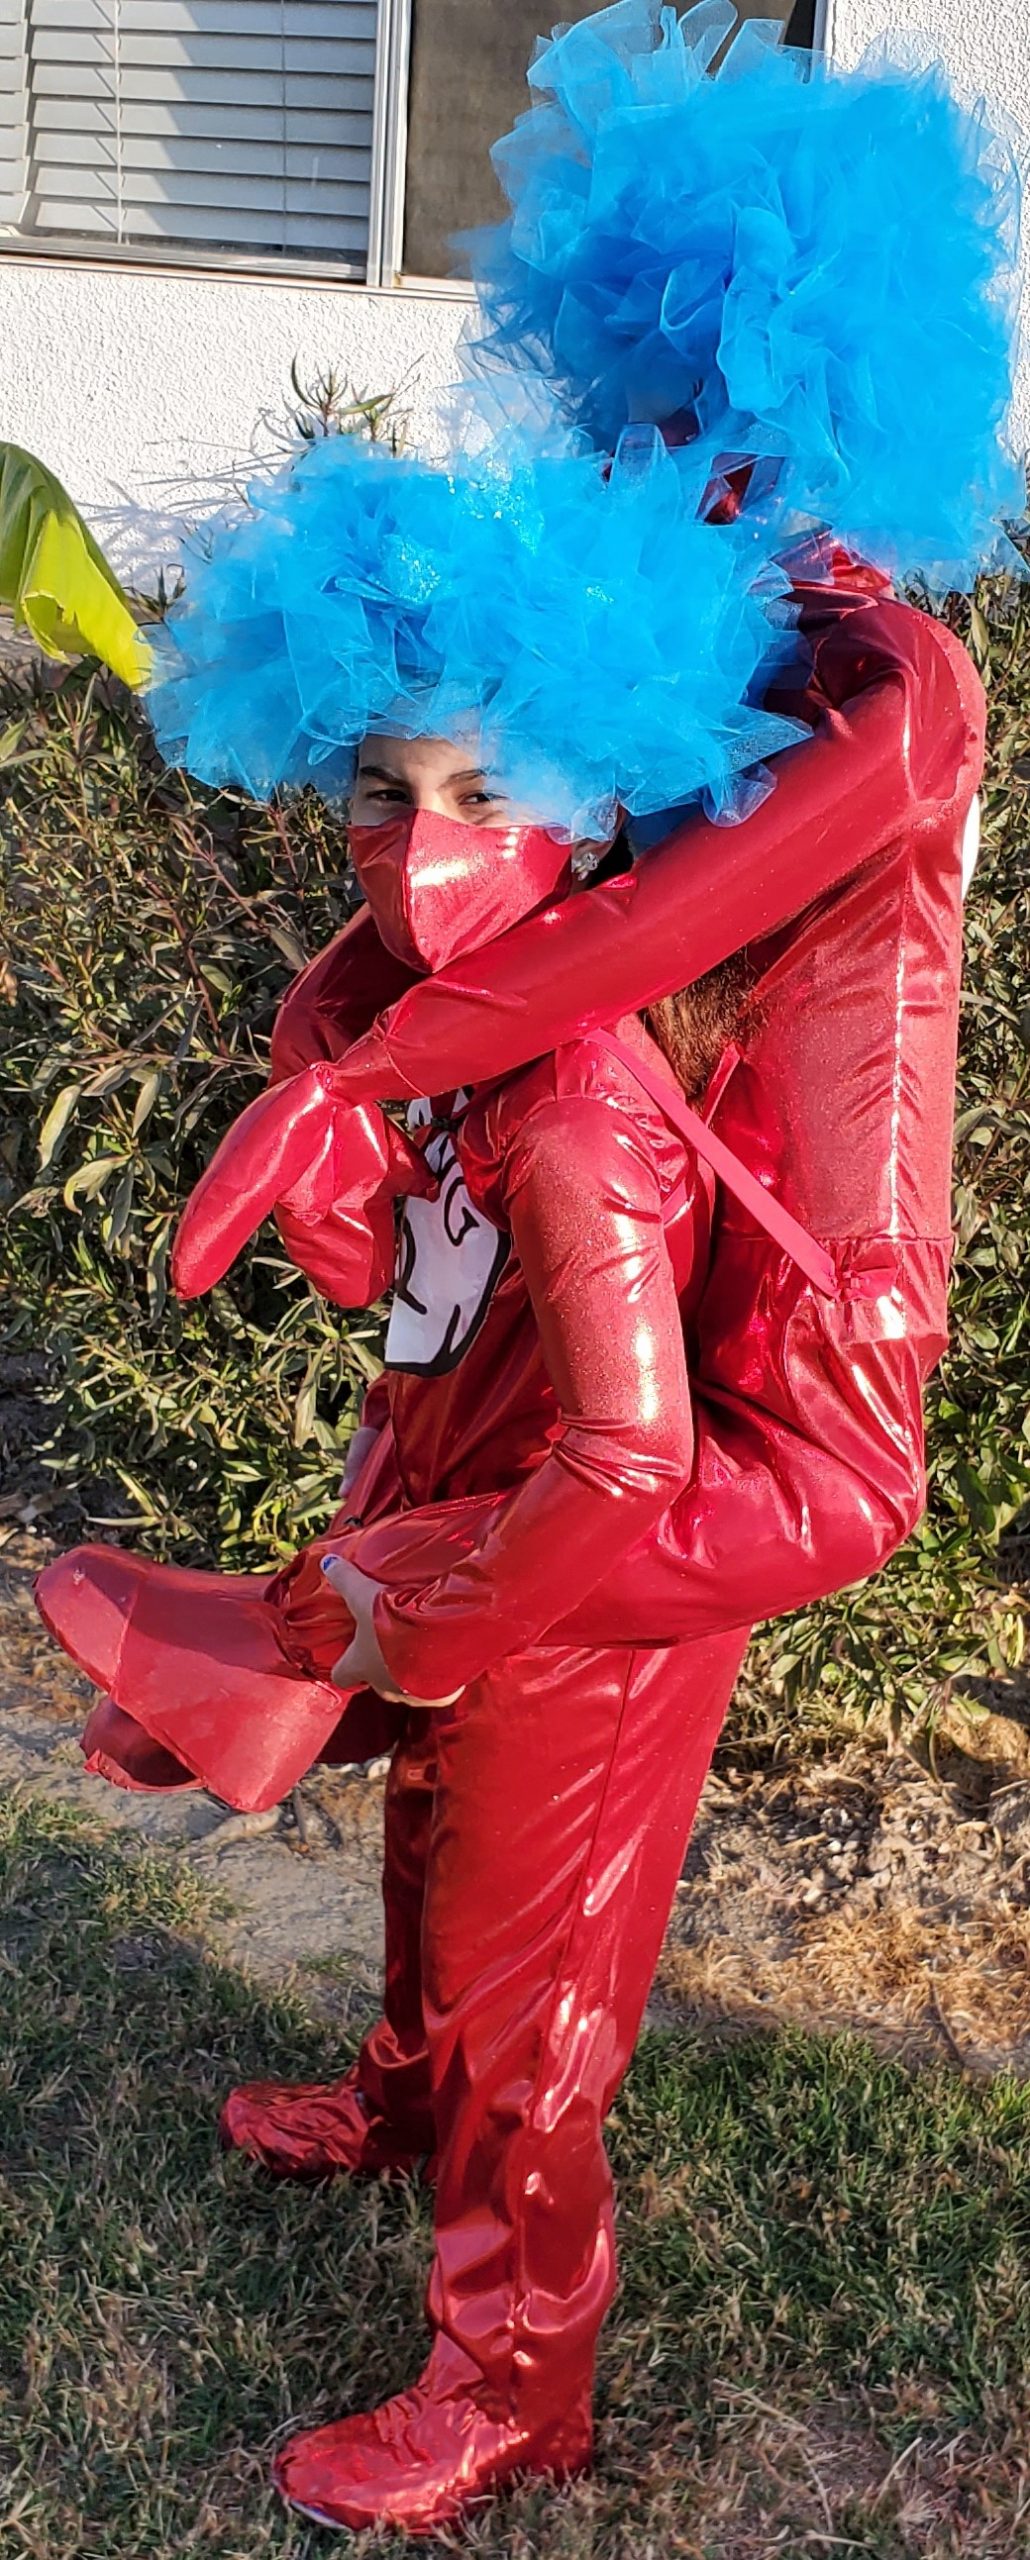 Coolest Homemade Thing 1 Costume and Thing 2 Illusion